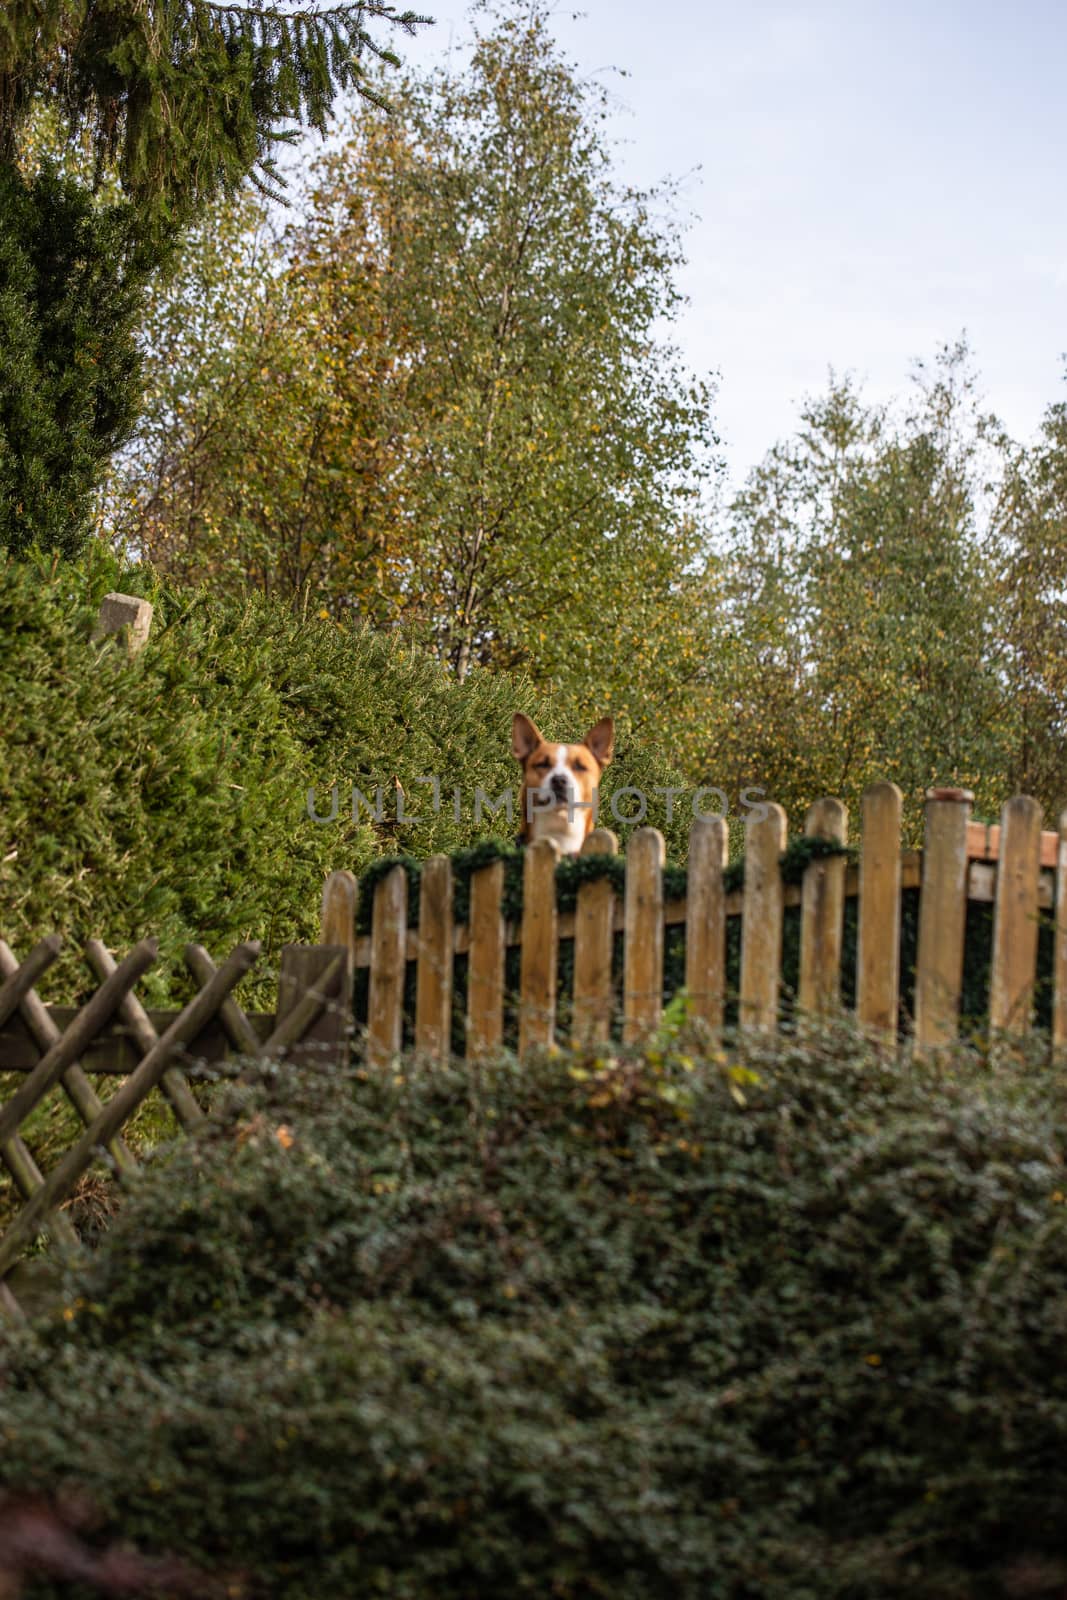 Dog stands on fence and watches